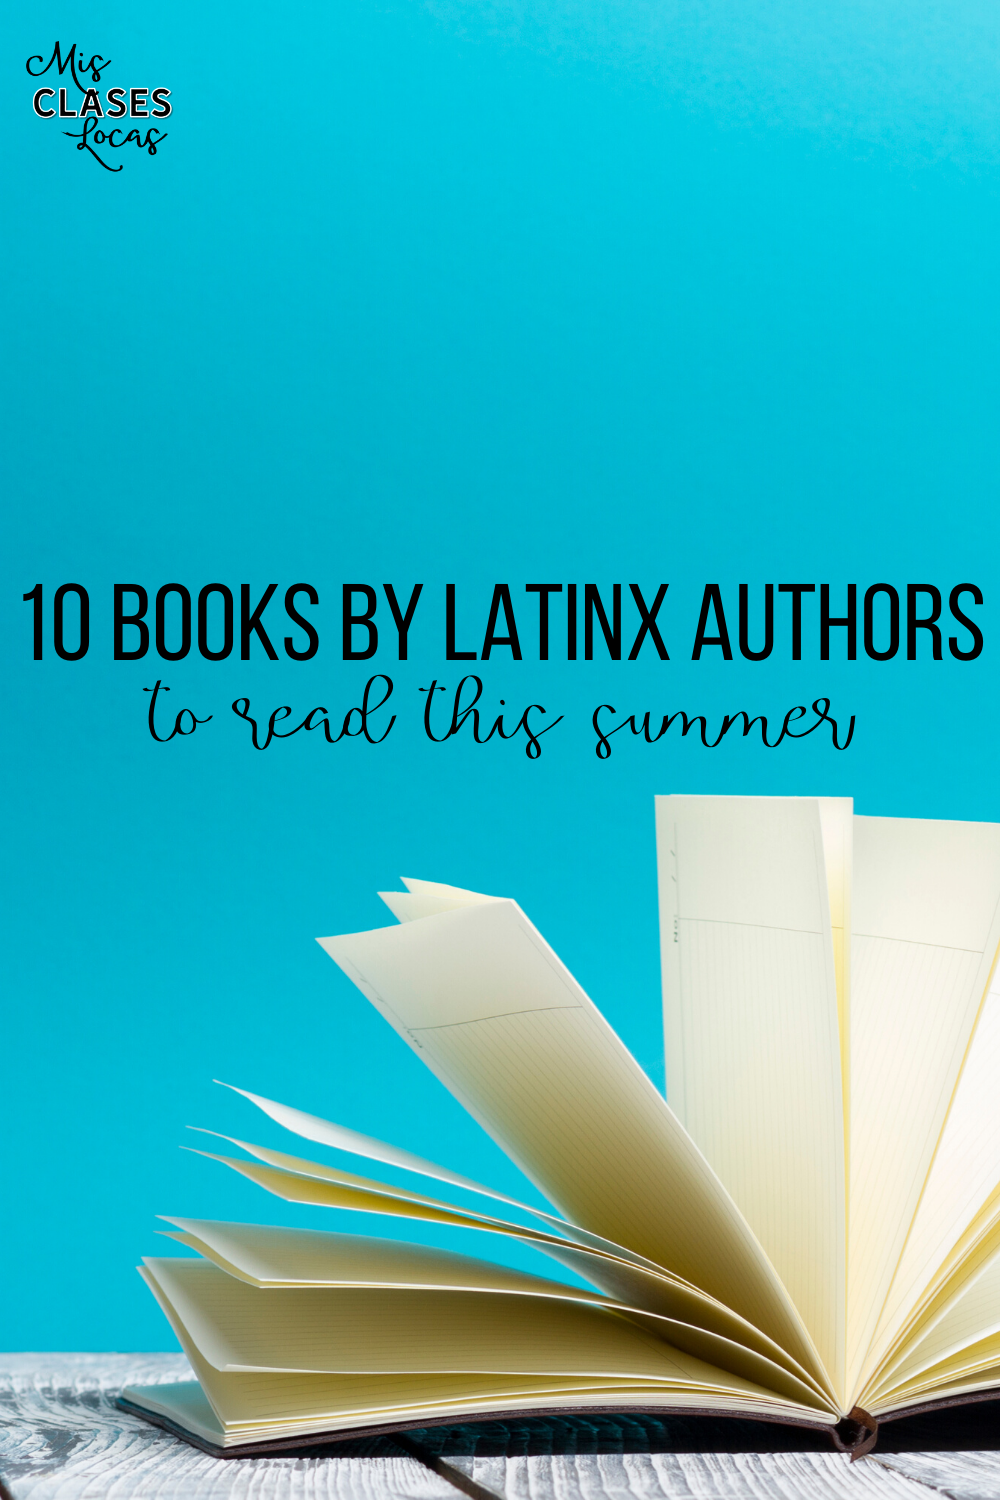 10 books by Latinx authors to read this summer - shared by Mis Clases Locas